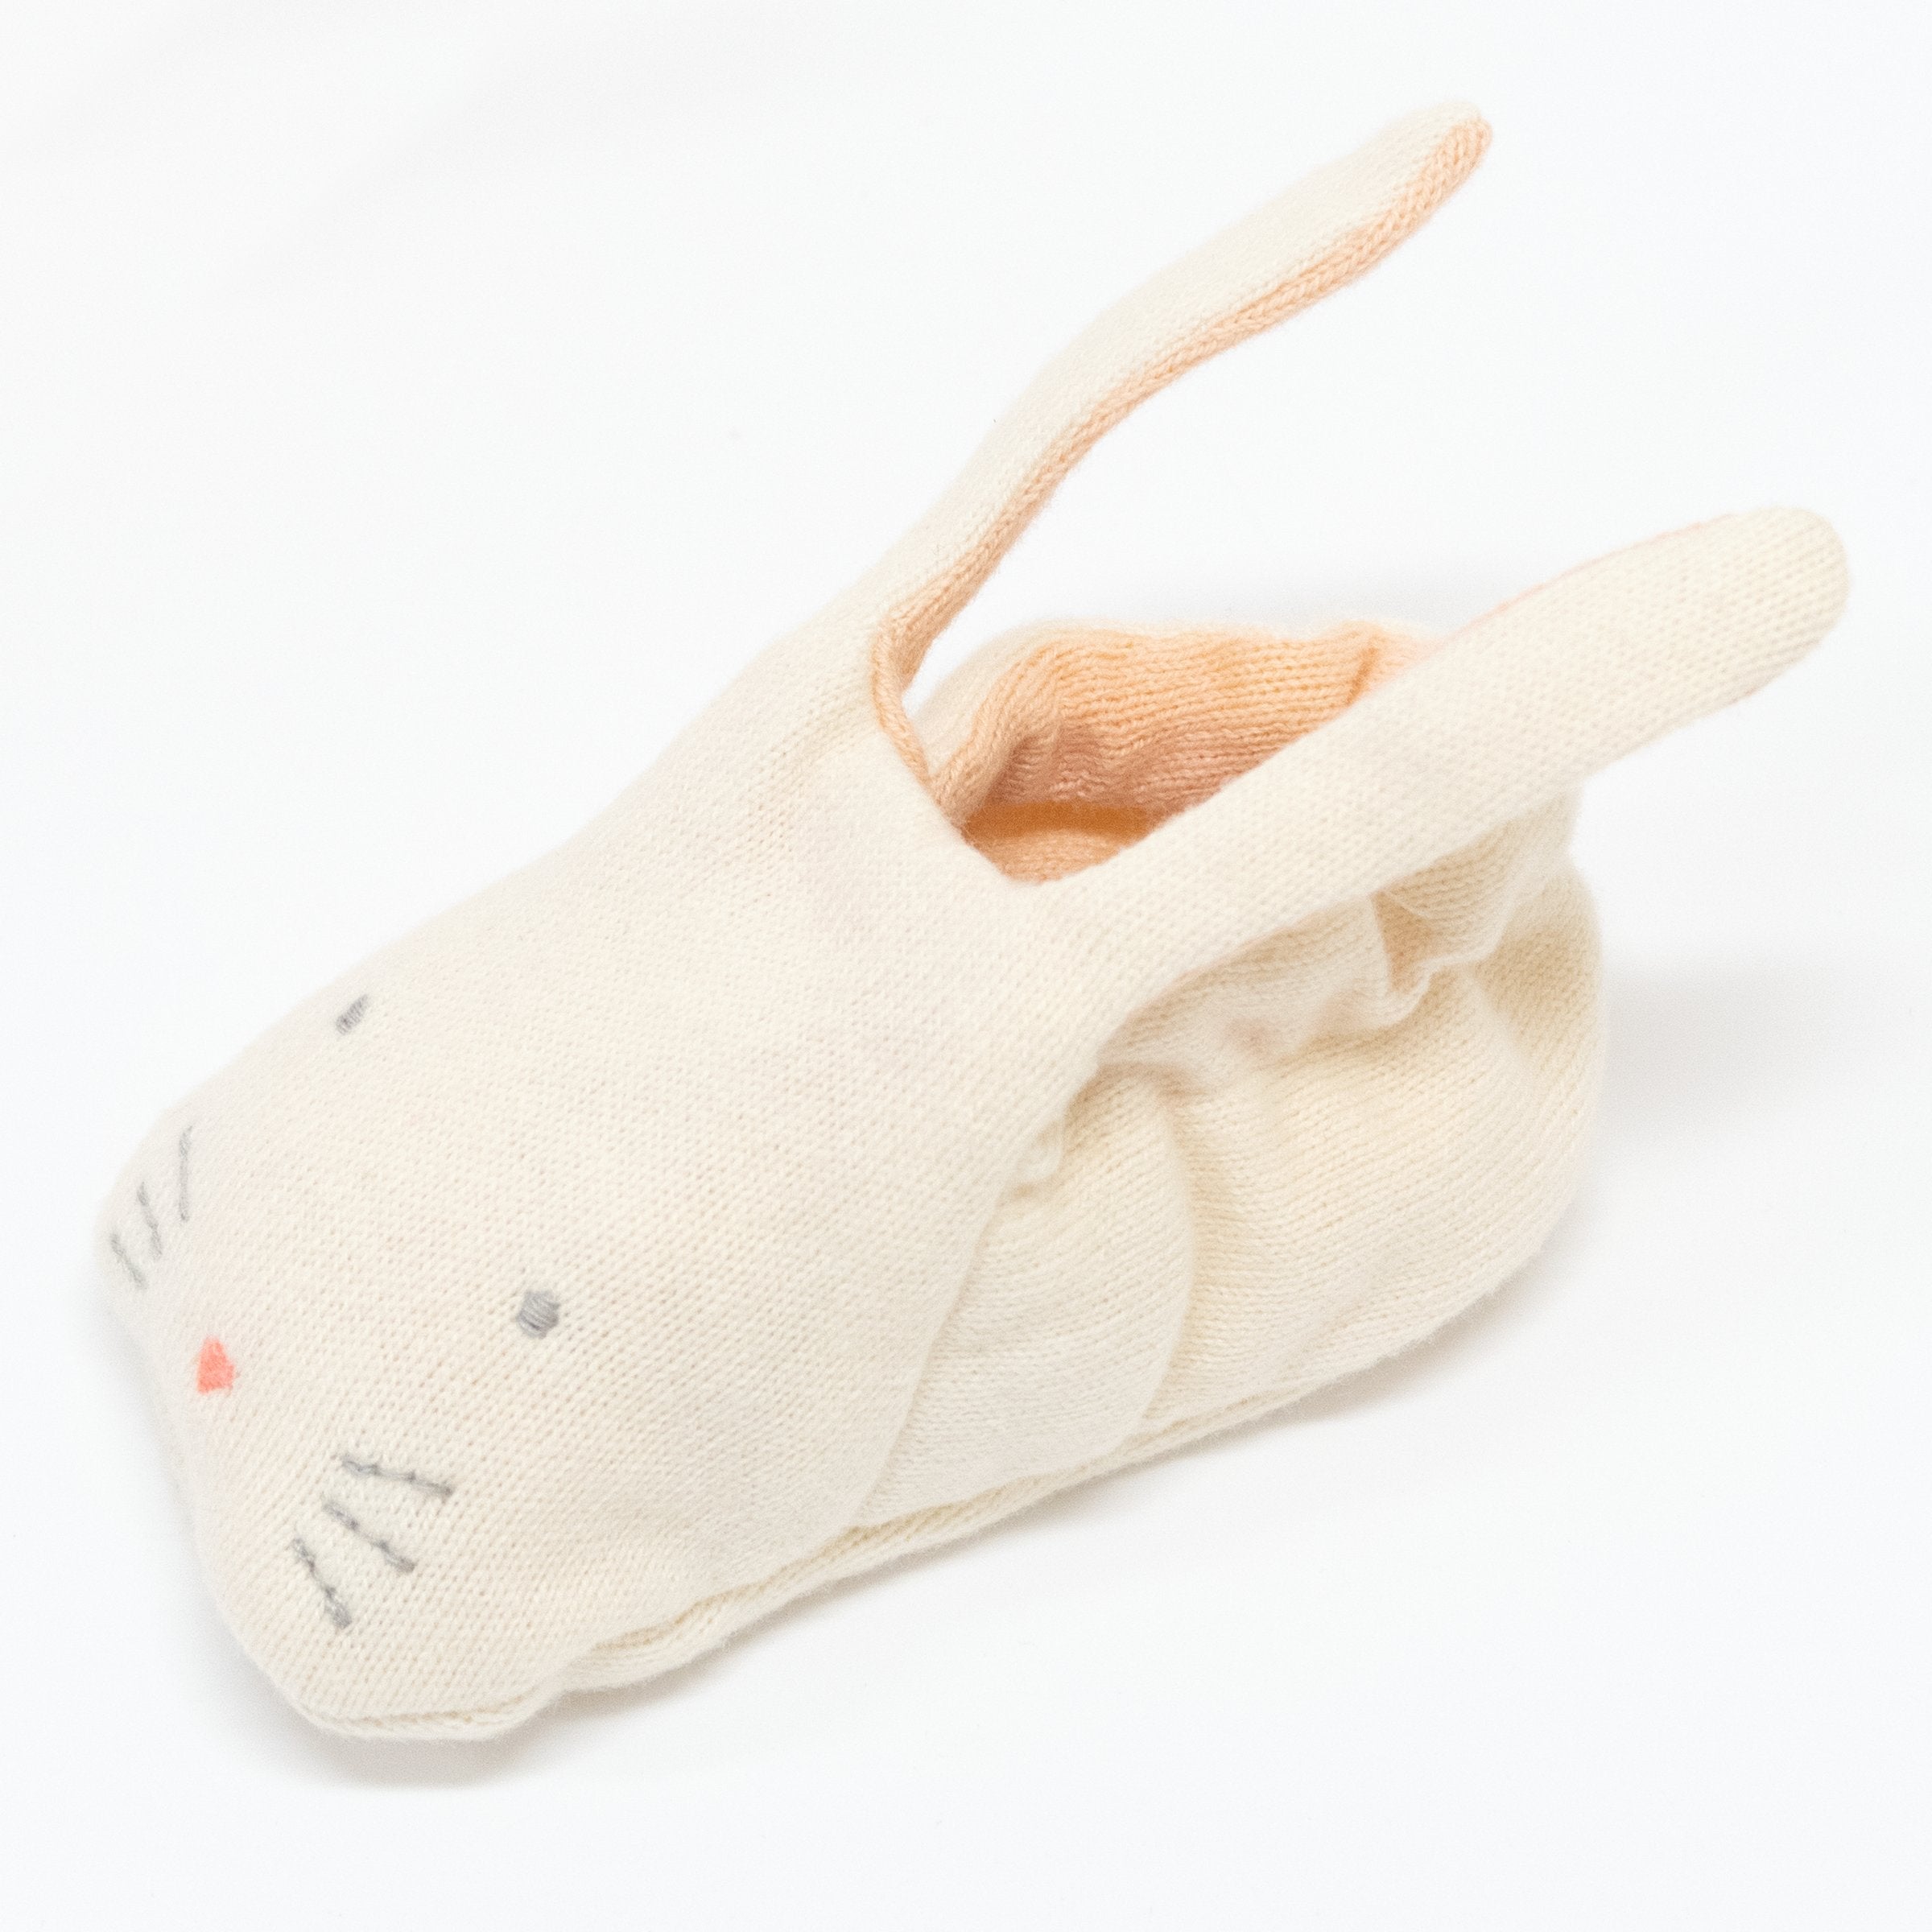 These adorable bunny booties are crafted from knitted organic cotton, with a peach lining, stitched features and floppy ears.